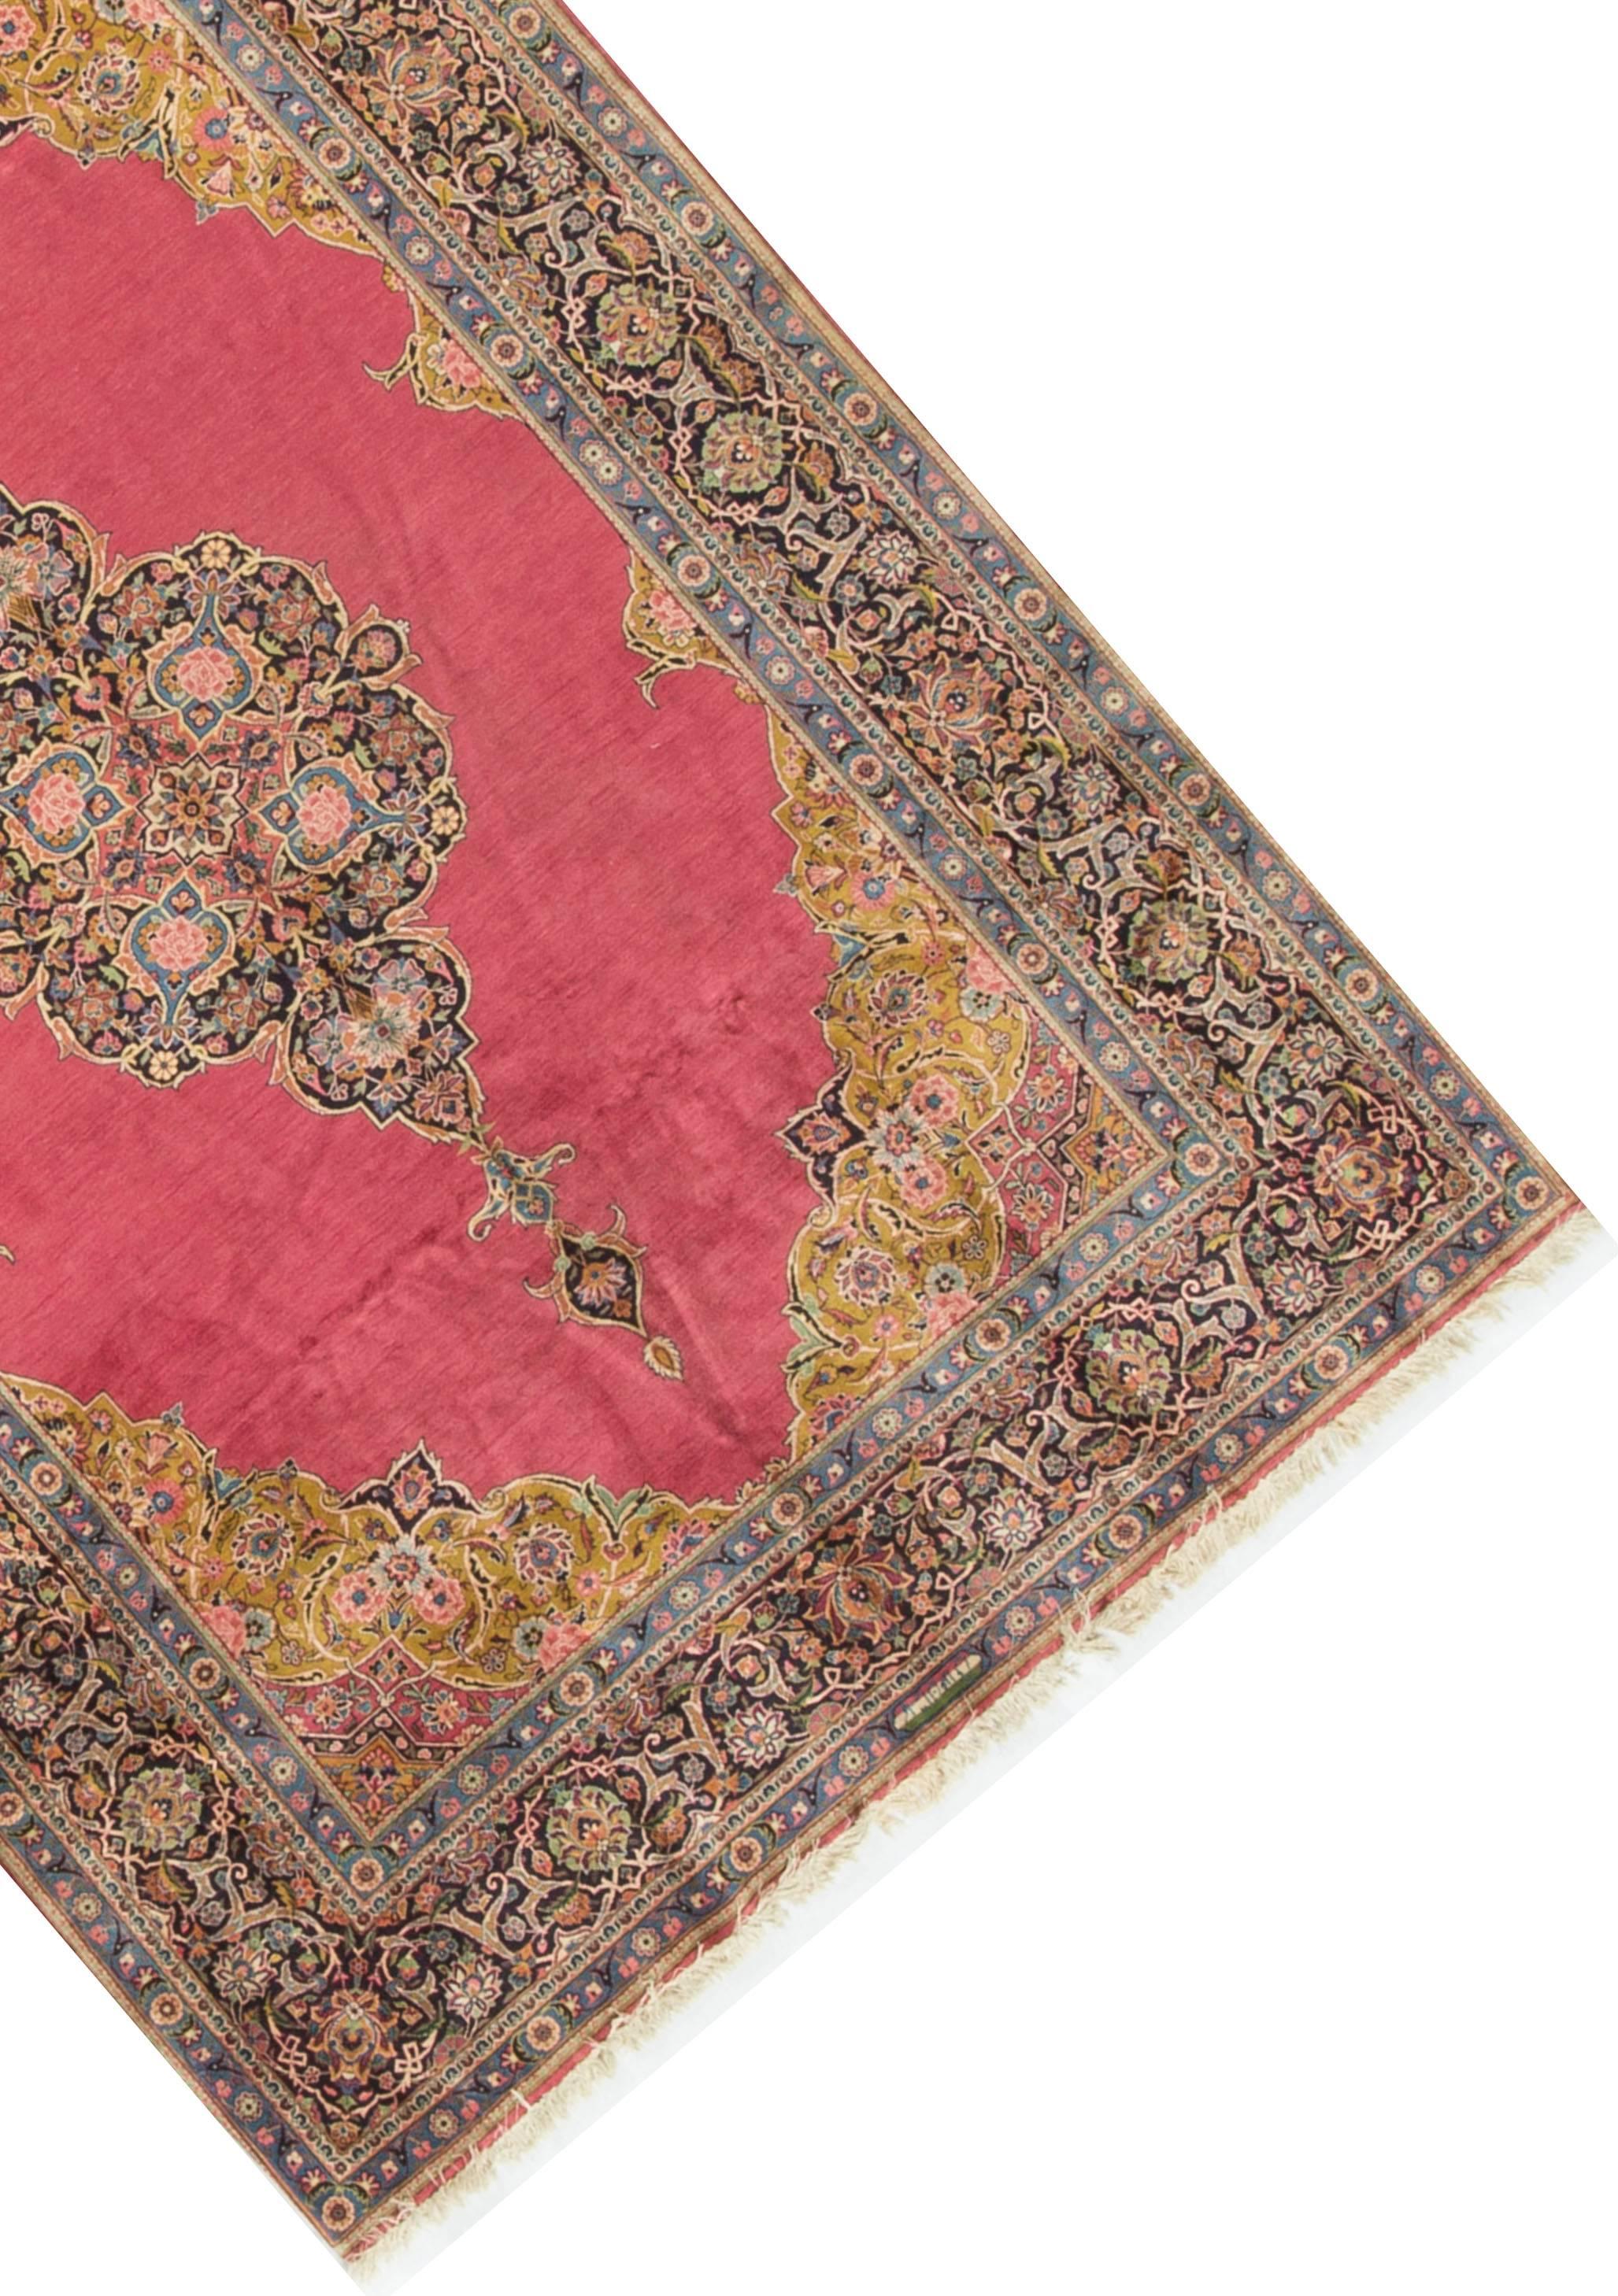 Persian antique Kashan rug, circa 1910. The plain central filled with a wonderful motif repeating the main border design but with six exquisite floral designs enclosed in powder blue vases. The corner spandrels introduce another color that brings a